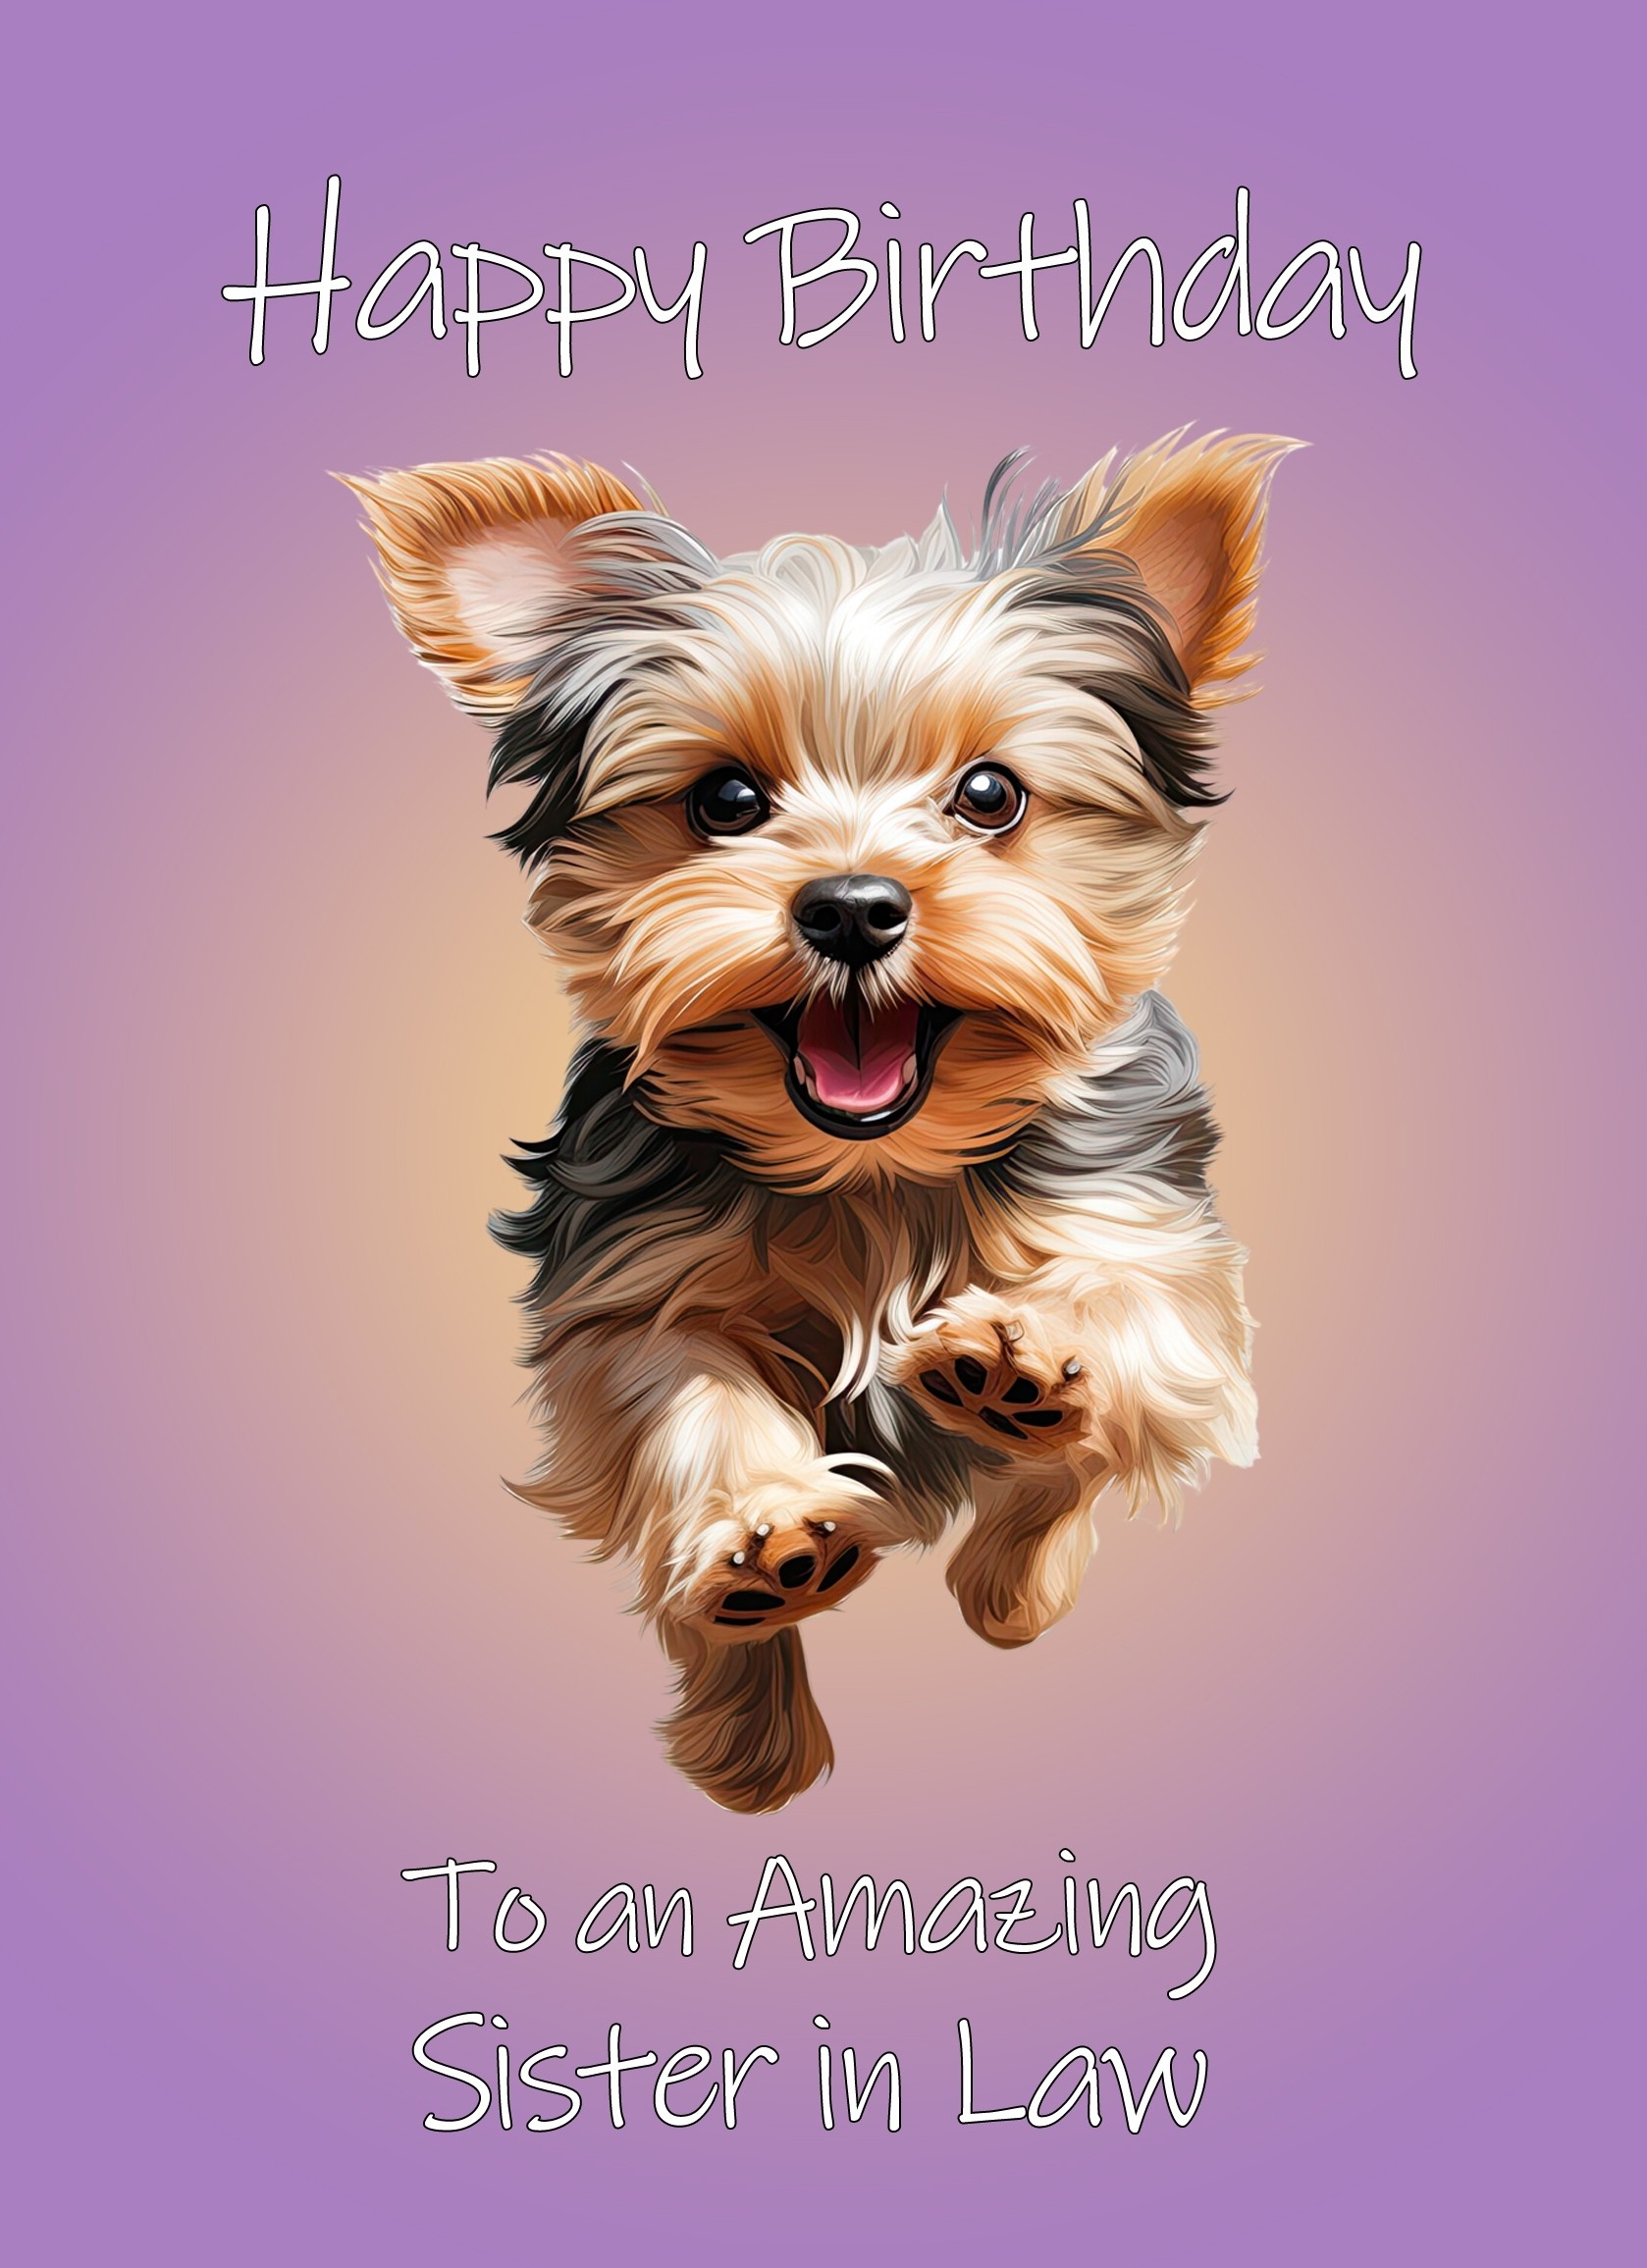 Yorkshire Terrier Dog Birthday Card For Sister in Law